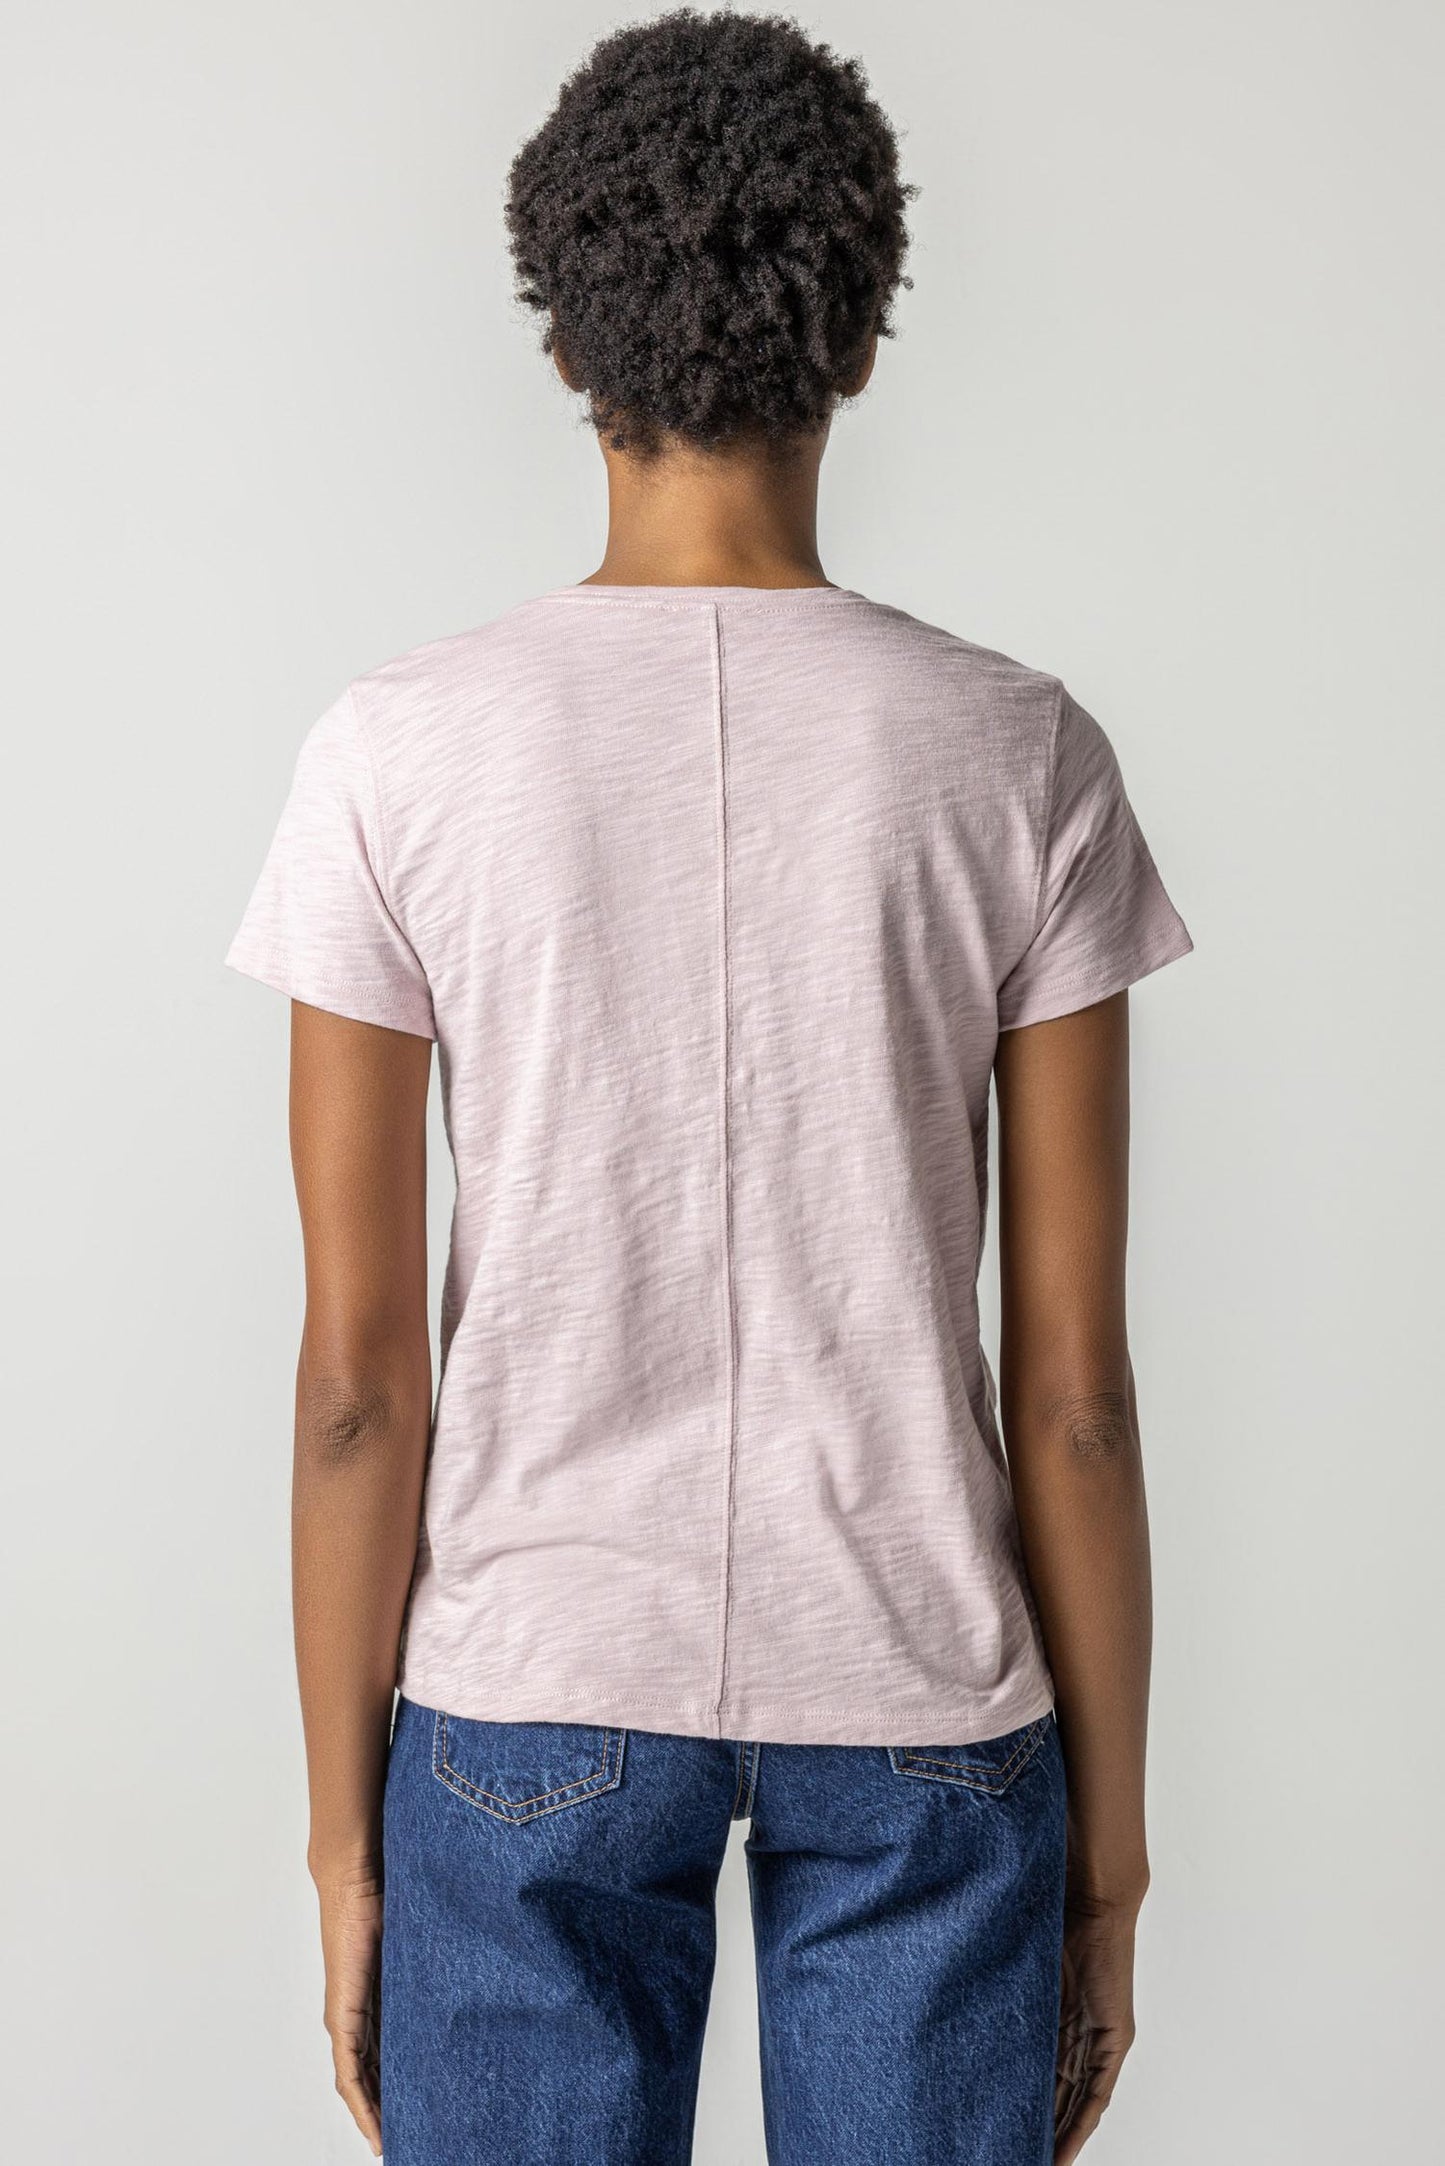 V-Neck Short Sleeve Back Seam Tee in iced lilac by Lilla P